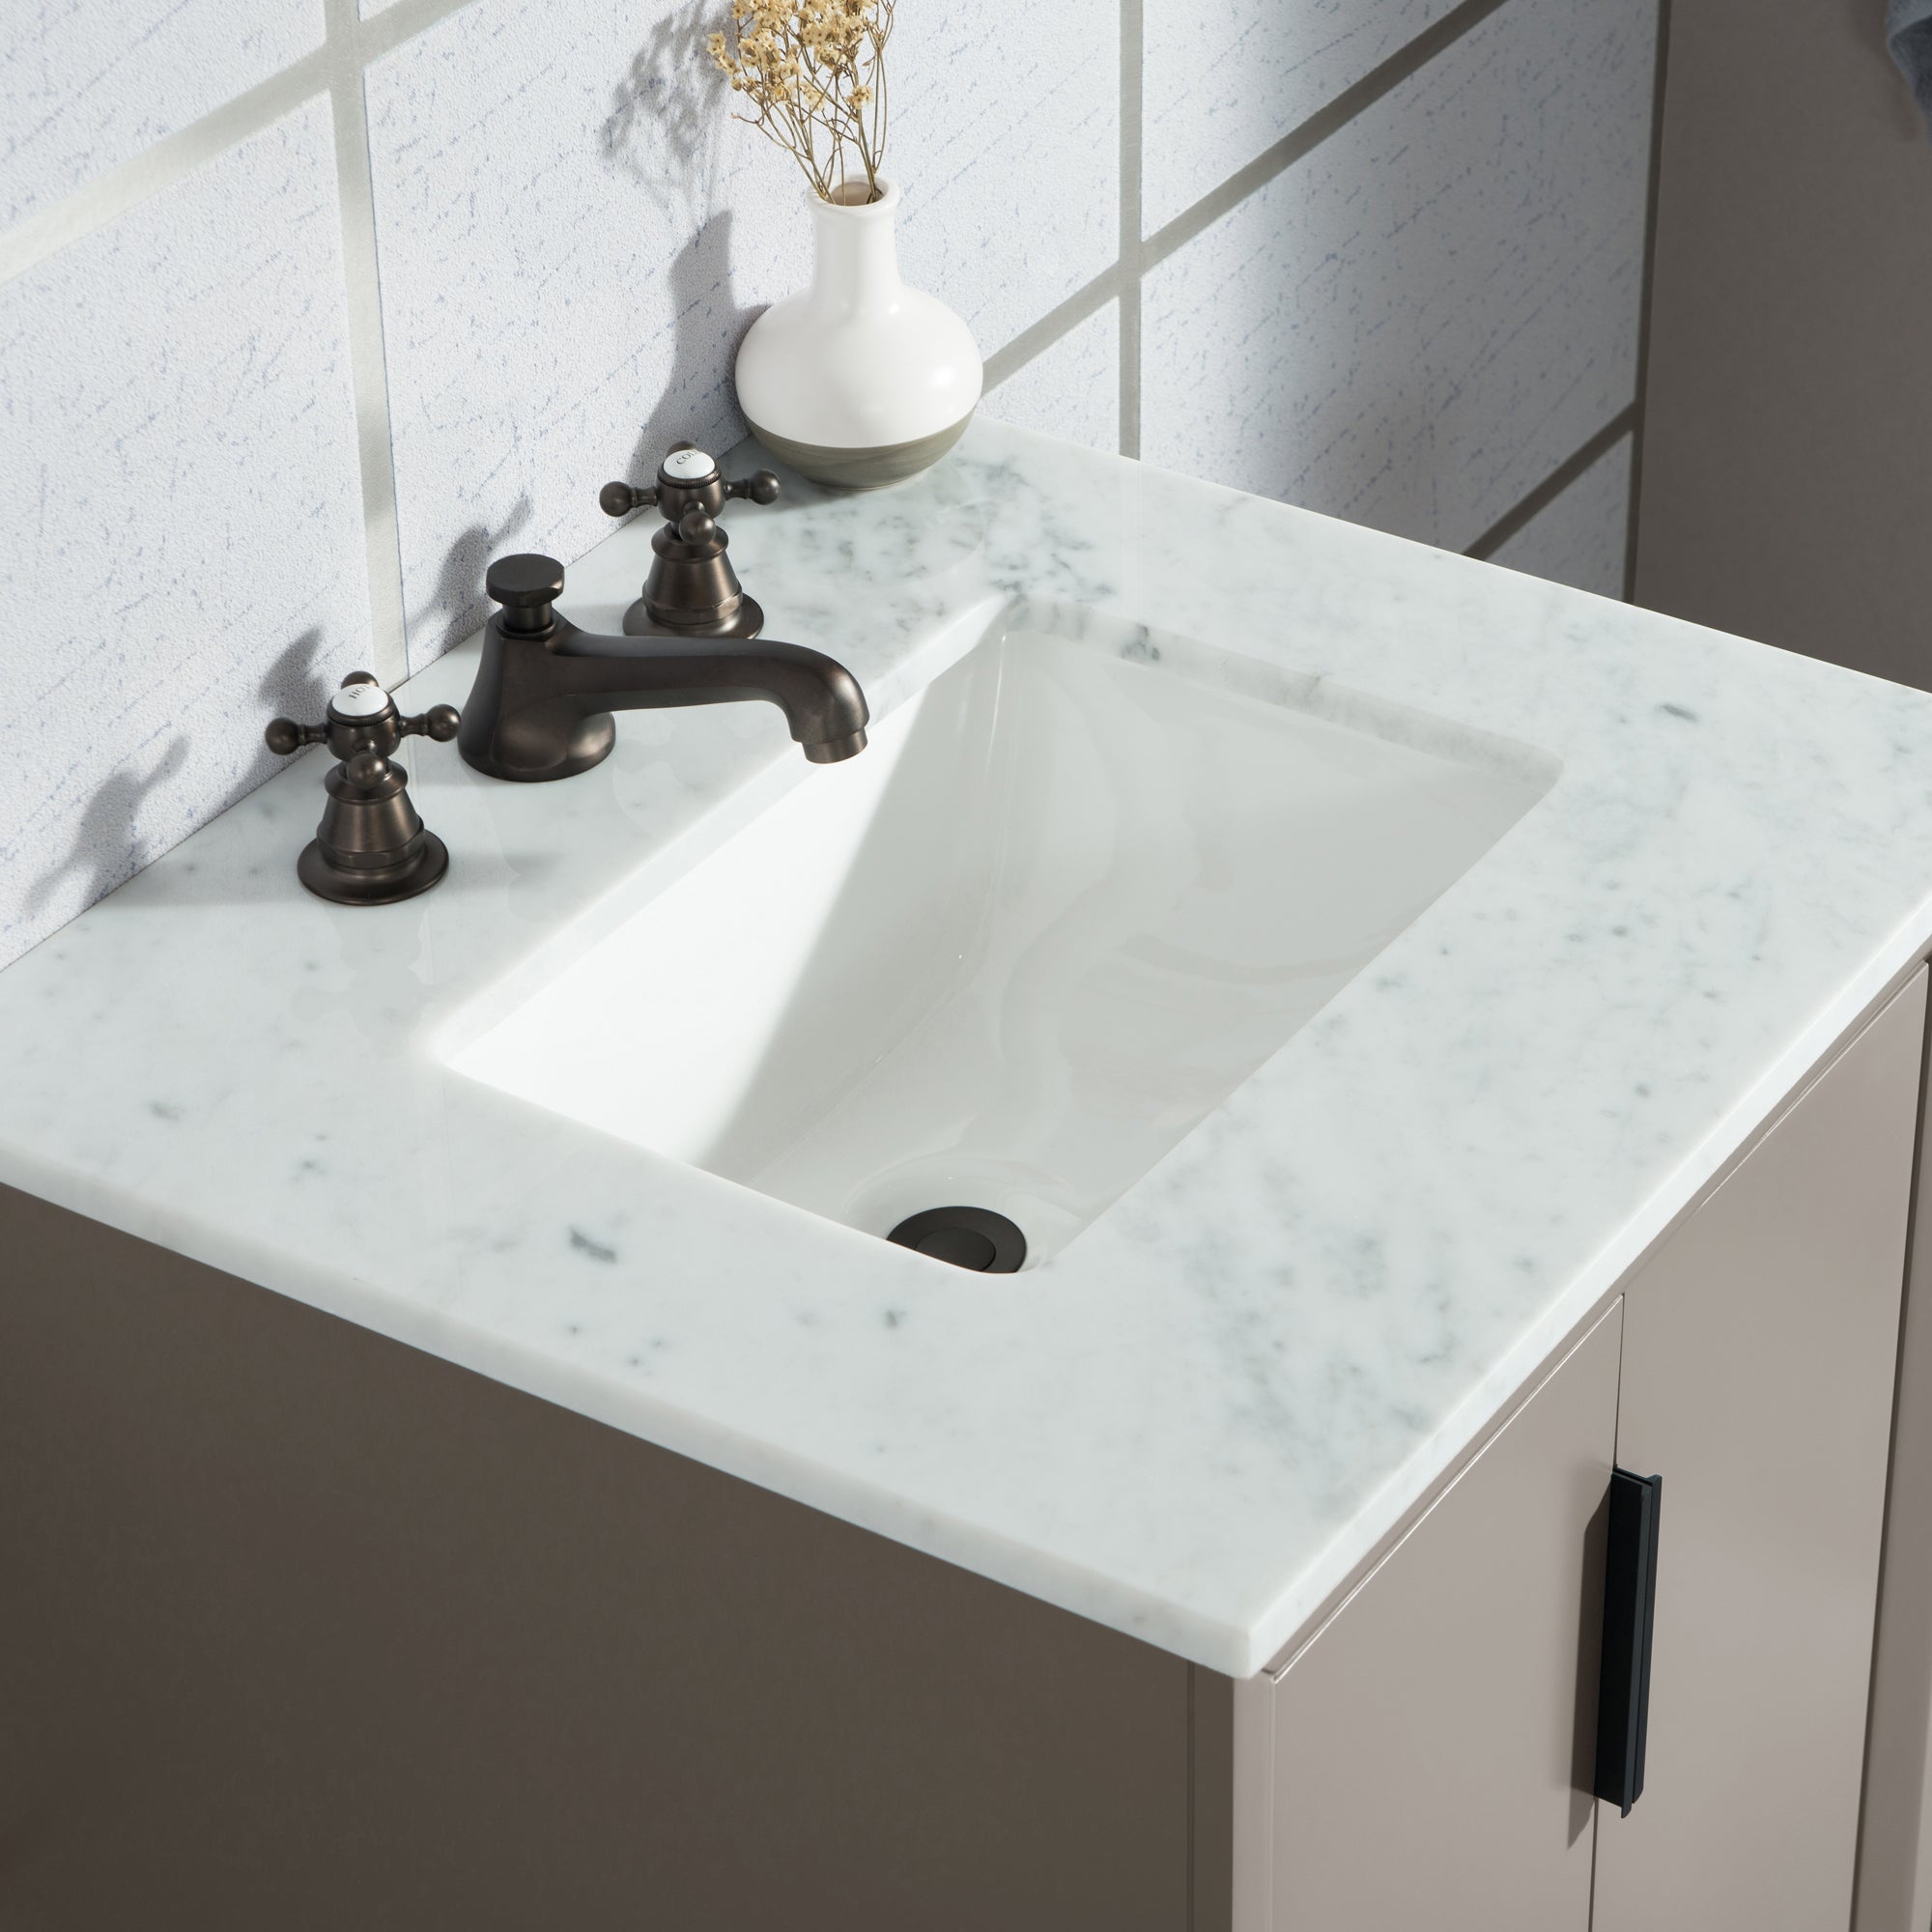 Water Creation | Elizabeth 24-Inch Single Sink Carrara White Marble Vanity In Cashmere Grey  With F2-0009-03-BX Lavatory Faucet(s) | EL24CW03CG-000BX0903